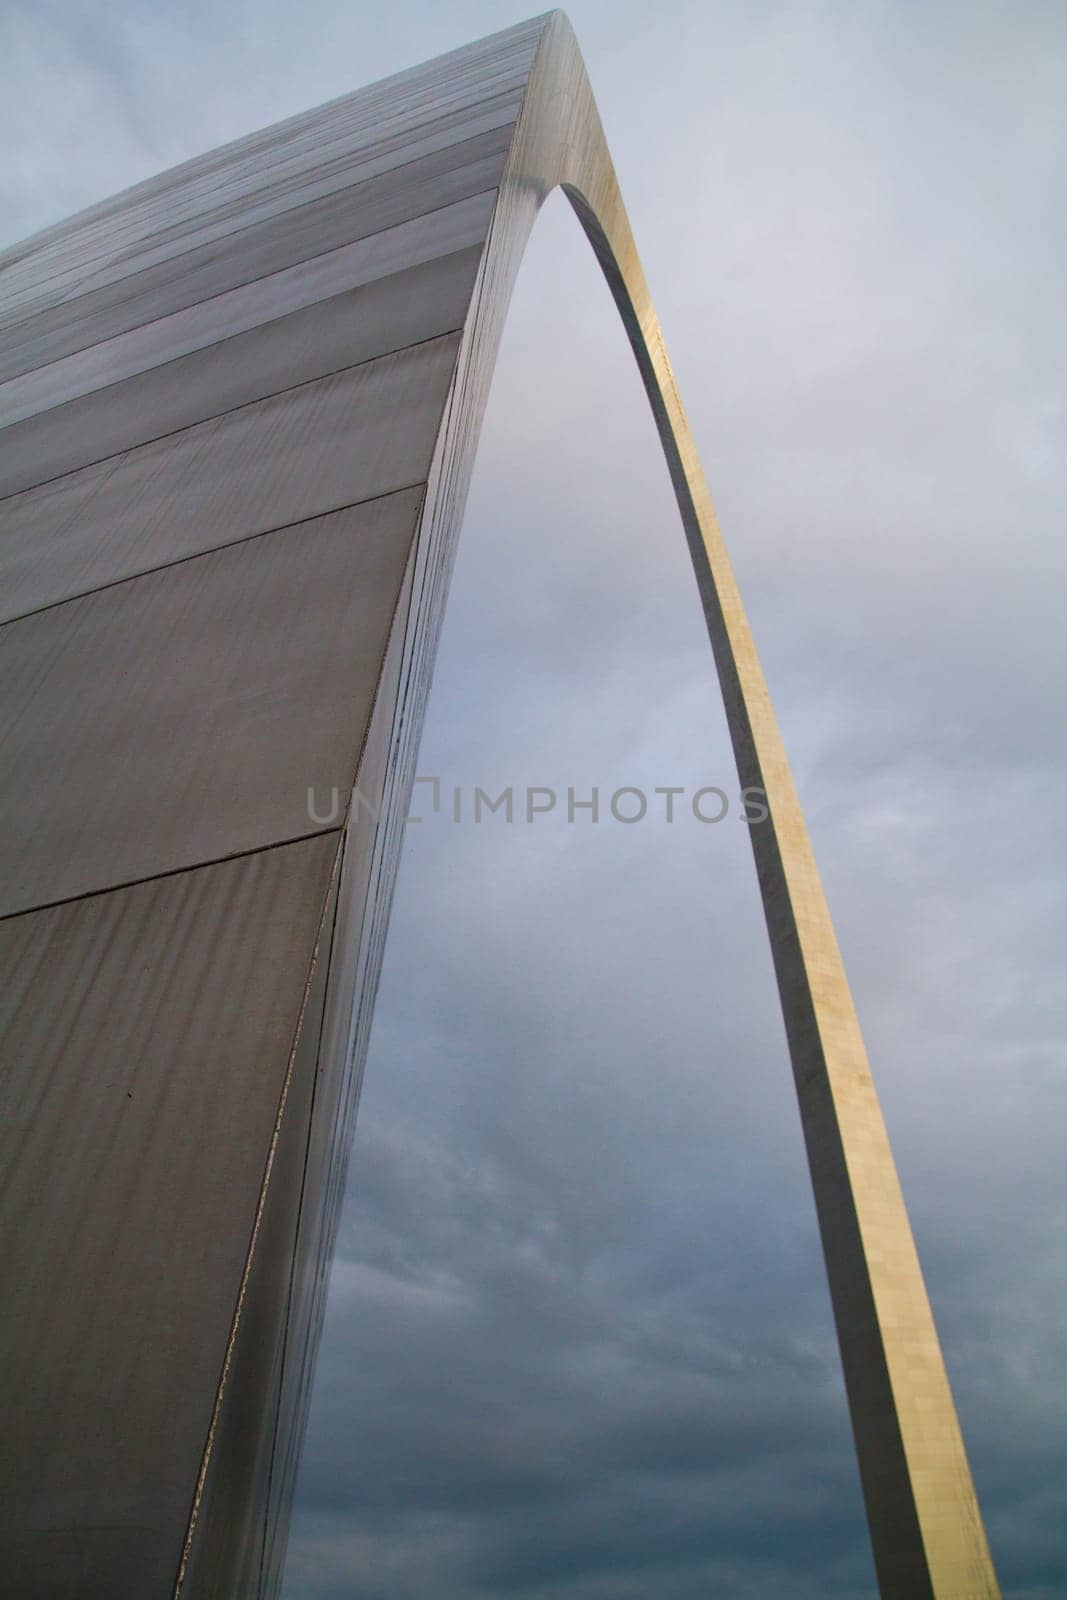 Reflective Steel Arch Against Moody Sky in St. Louis by njproductions